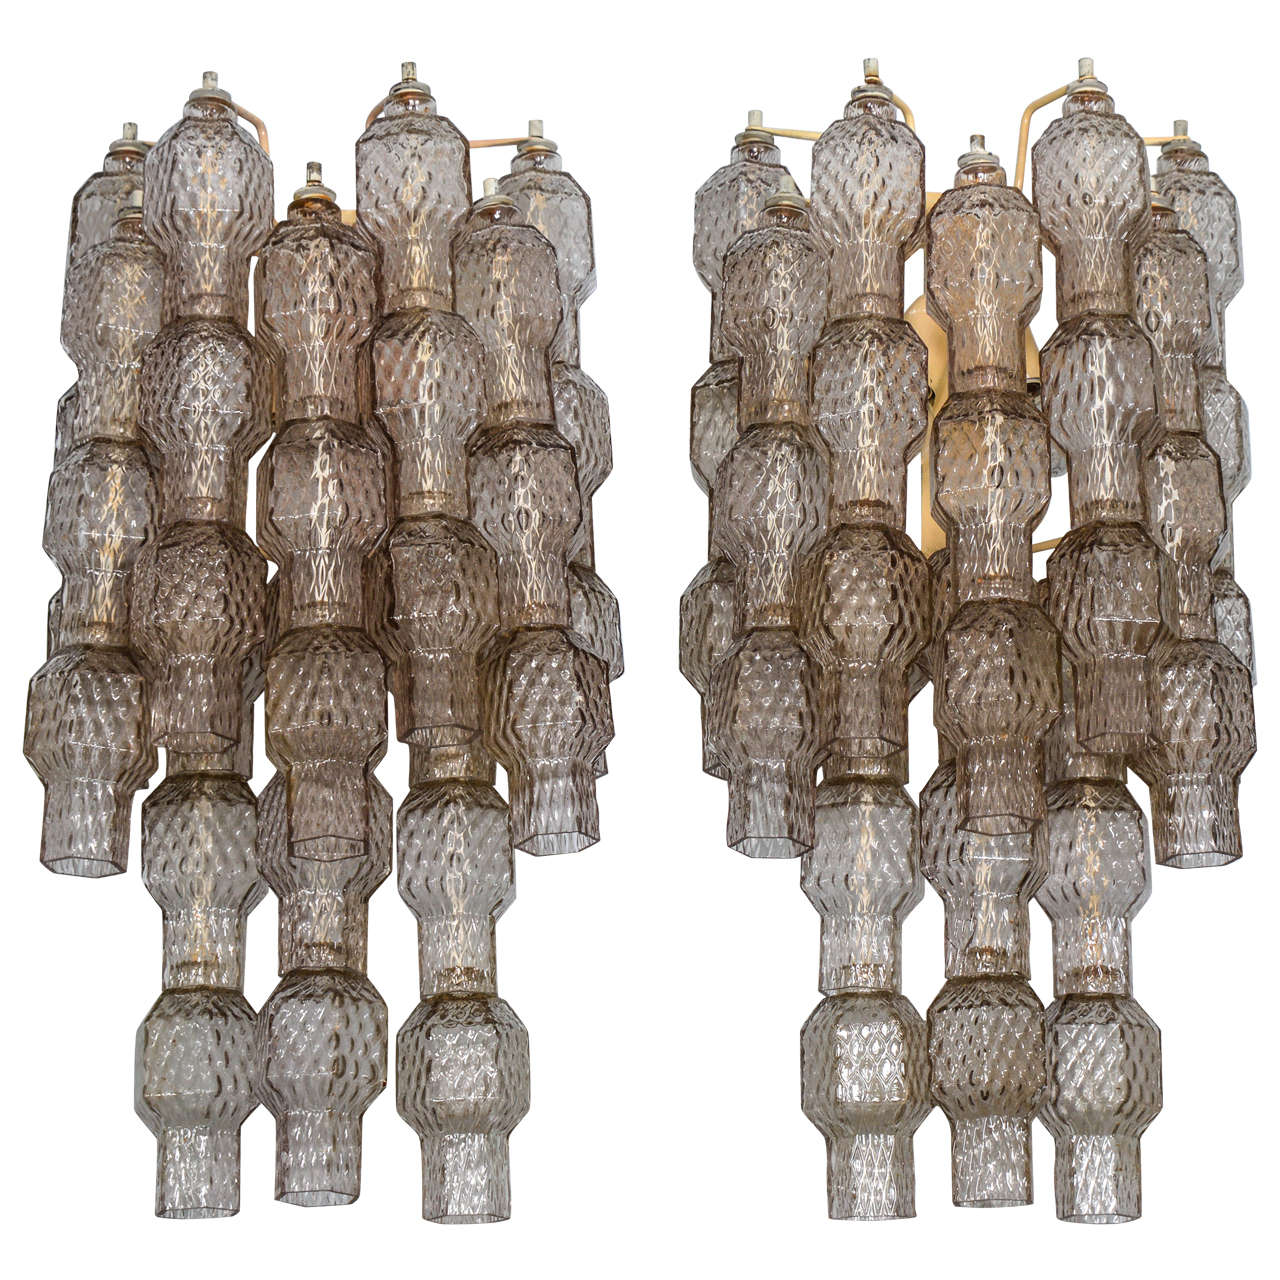 Pair of Wall Sconces in Murano Glass